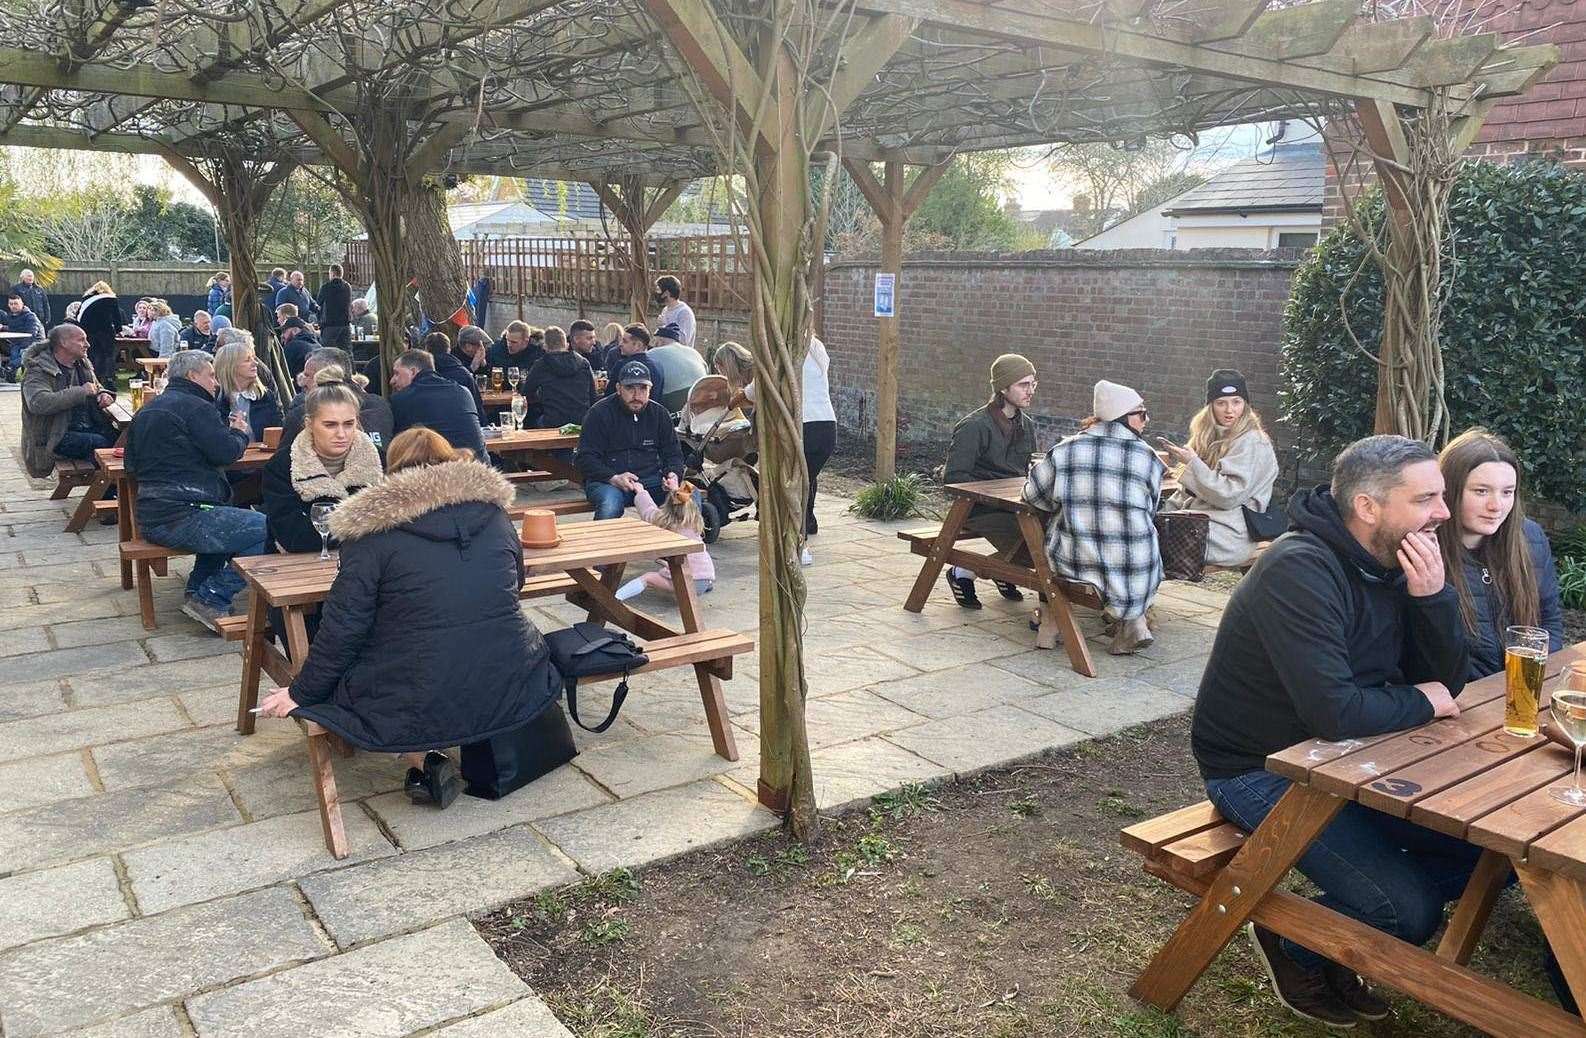 Pubgoers braved chilly conditions to enjoy The New Fox Inn yesterday